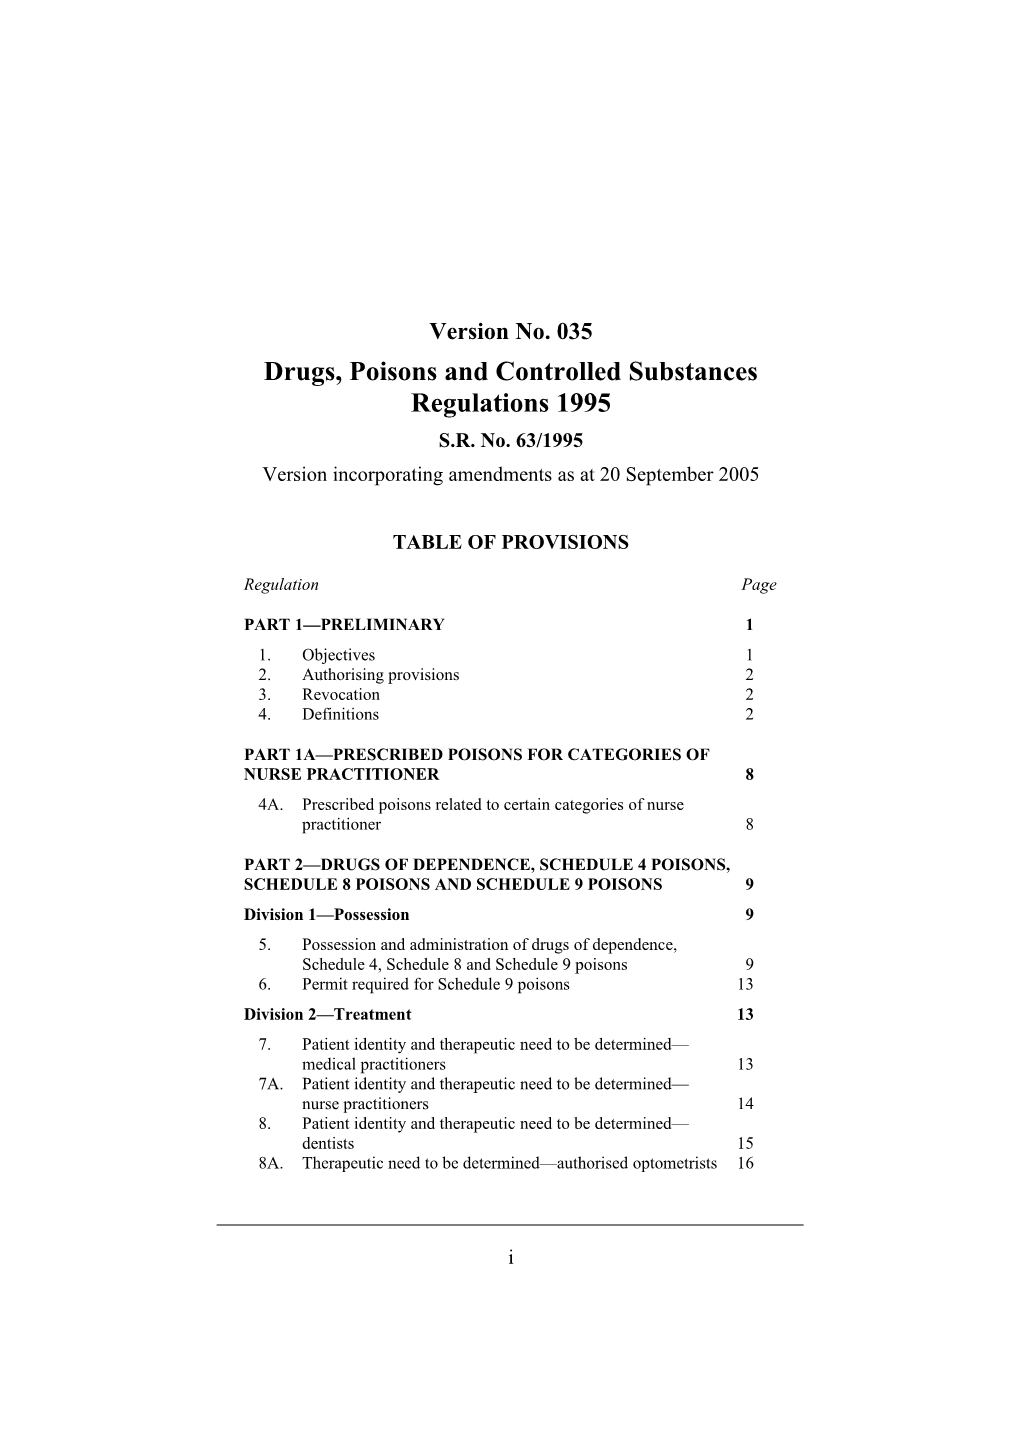 Drugs, Poisons and Controlled Substances Regulations 1995